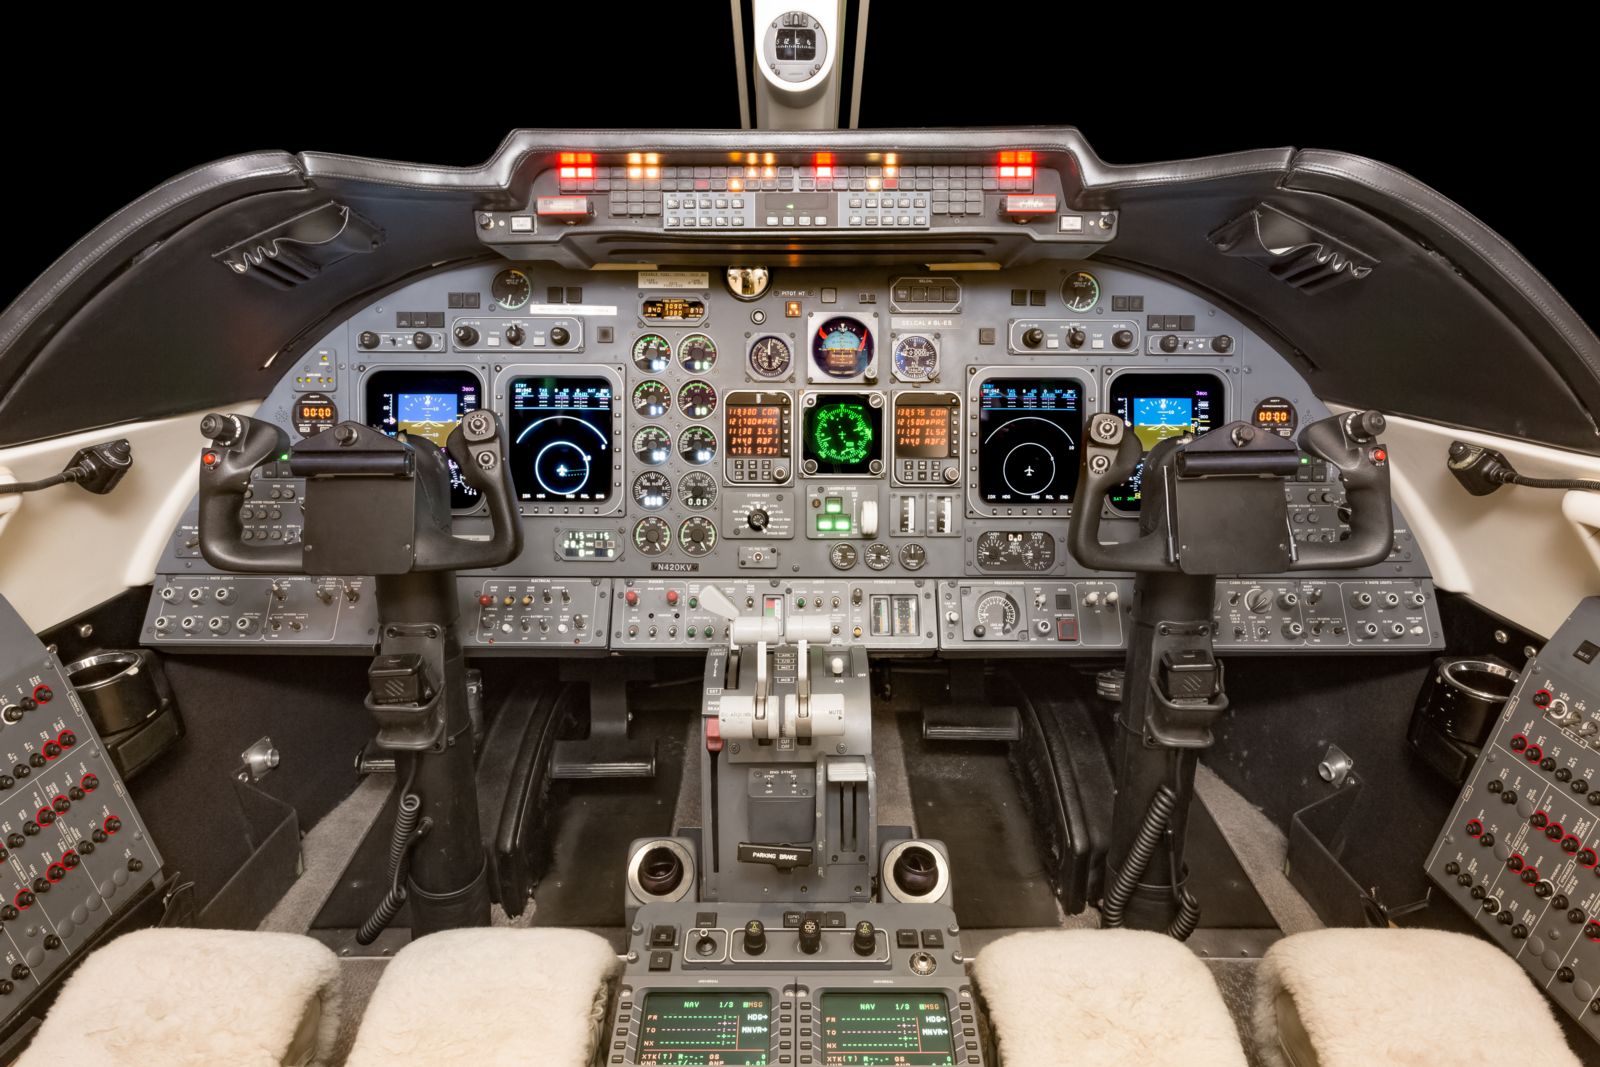 Bombardier Learjet 60  S/N 60-197 for sale | gallery image: /userfiles/images/Lear60_sn197/cockpit.jpg